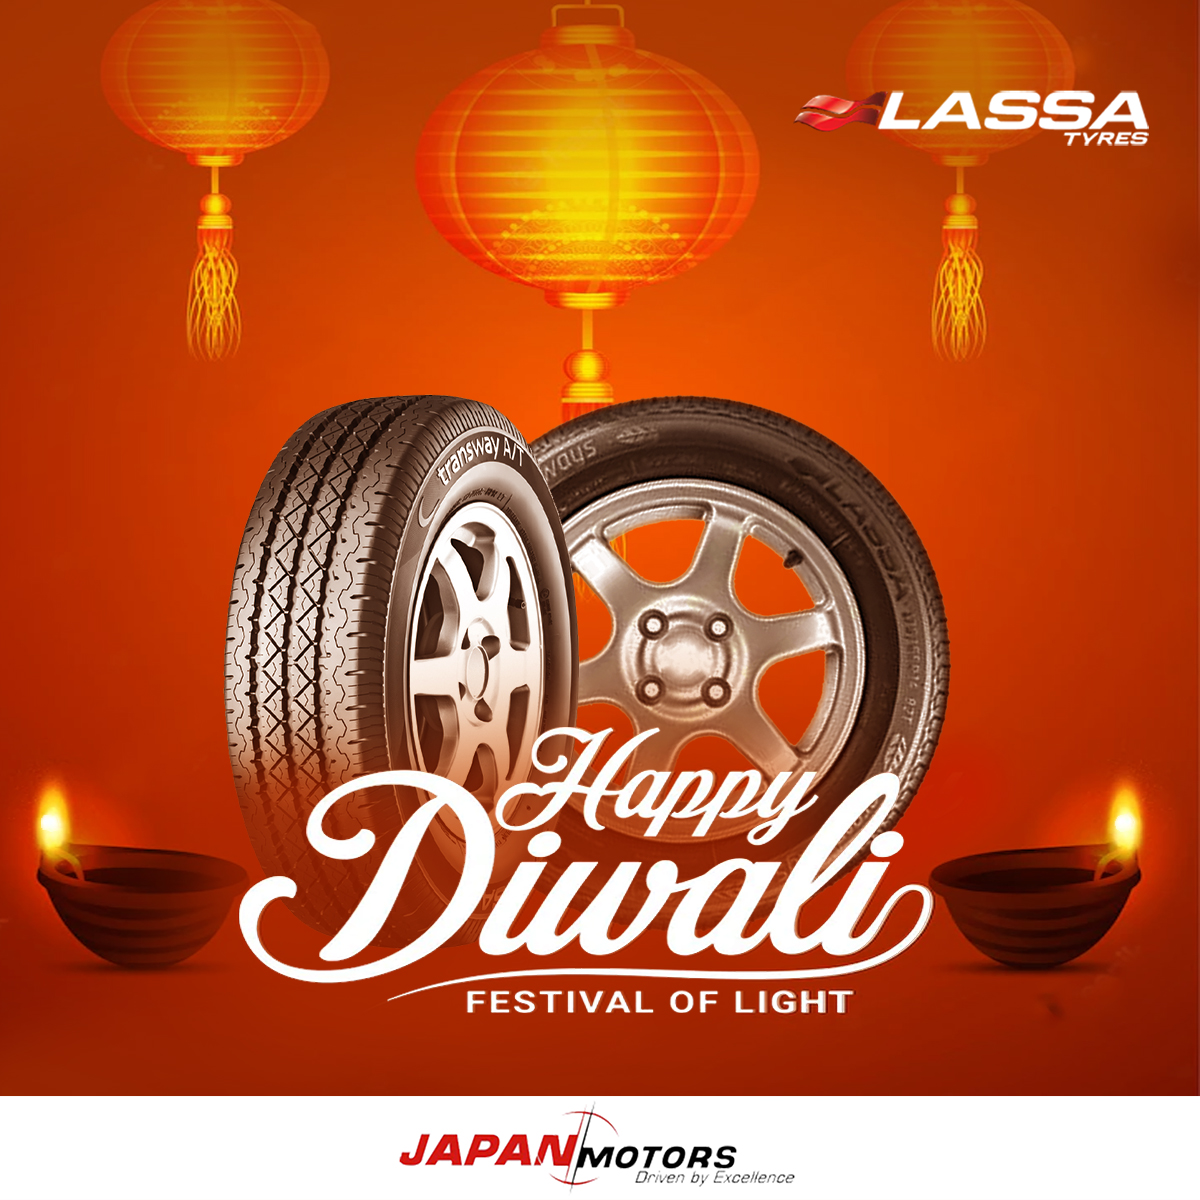 May joy and happiness fill your entire life and family on this special day! Happy Diwali ✨✨

#diwali2022 #Diwali #JapanMotors #LassaTyres #tyres #TyreChecks #diwalicelebrations #diwaliparty #FestivalOfLights